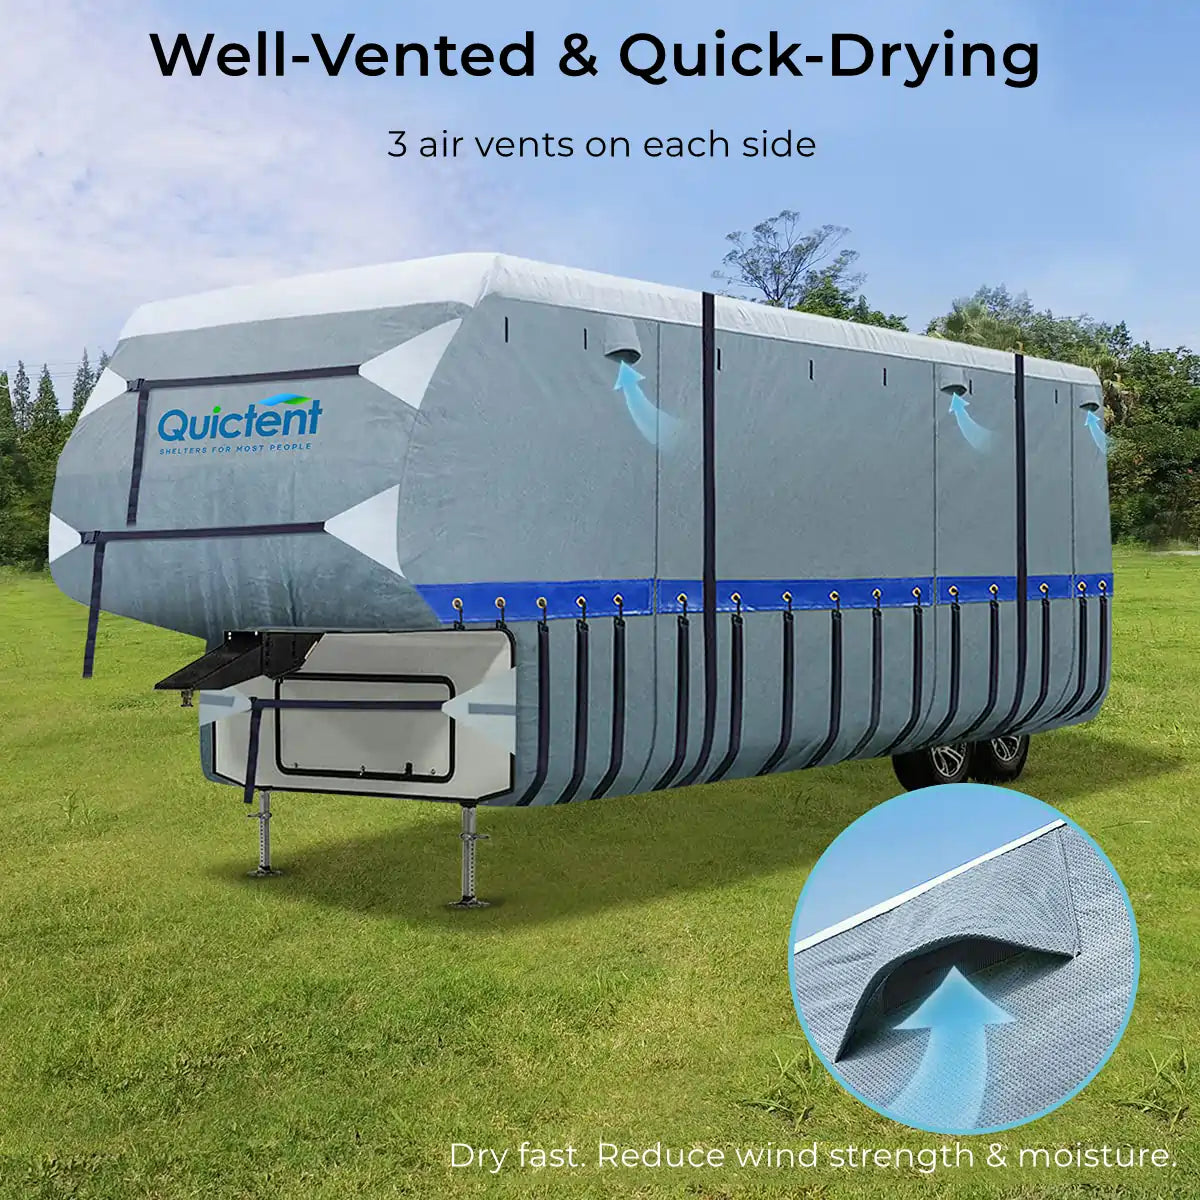 Quick-drying 5th Wheel RV Cover